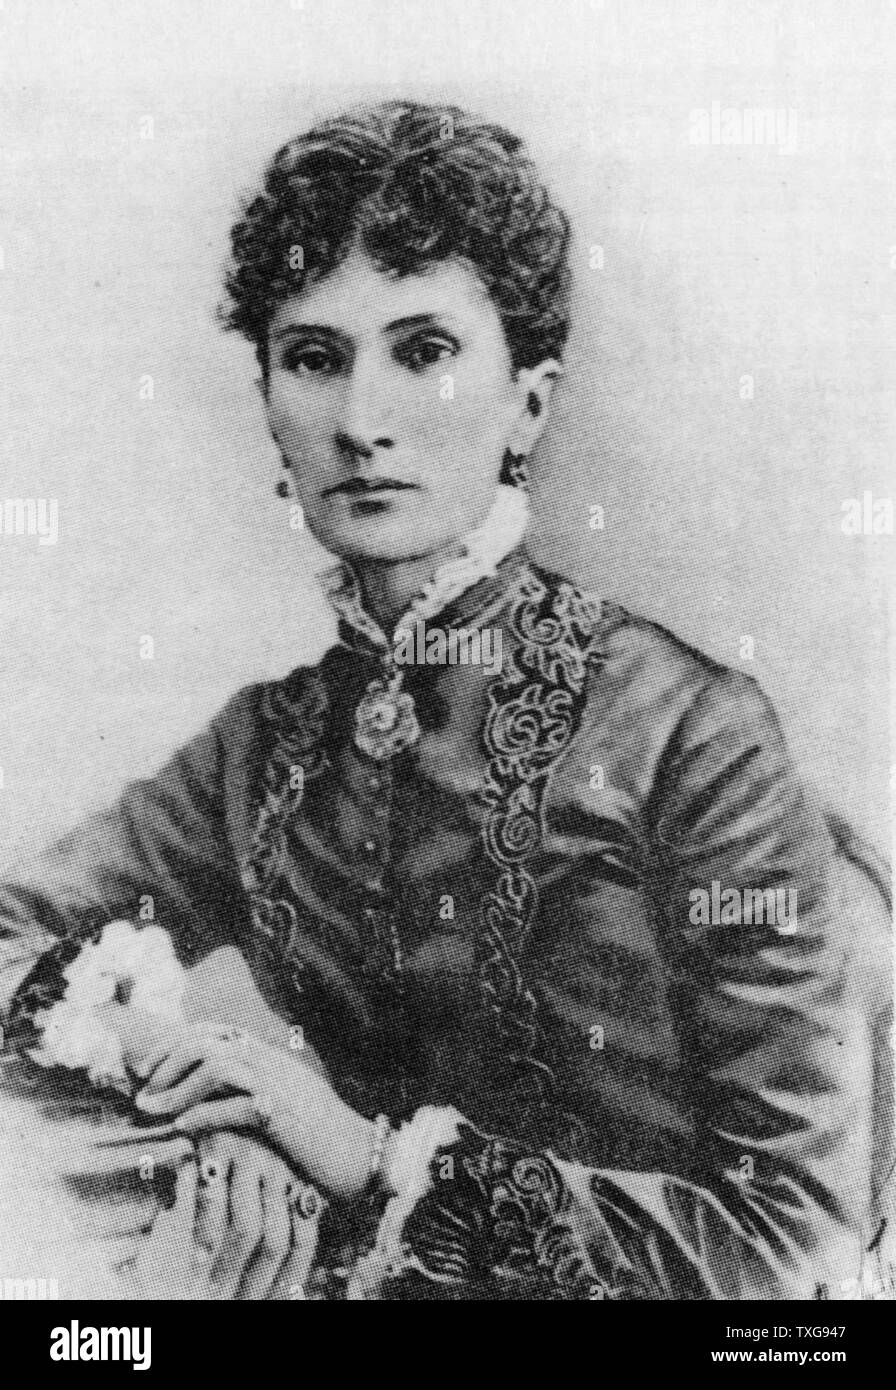 Nadezhda  von Meck, Russian businesswoman, who is best known today for her artistic relationship with Pyotr Ilyich Tchaikovsky. She supported him financially for 13 years, enabling him to devote himself full-time to composition Stock Photo